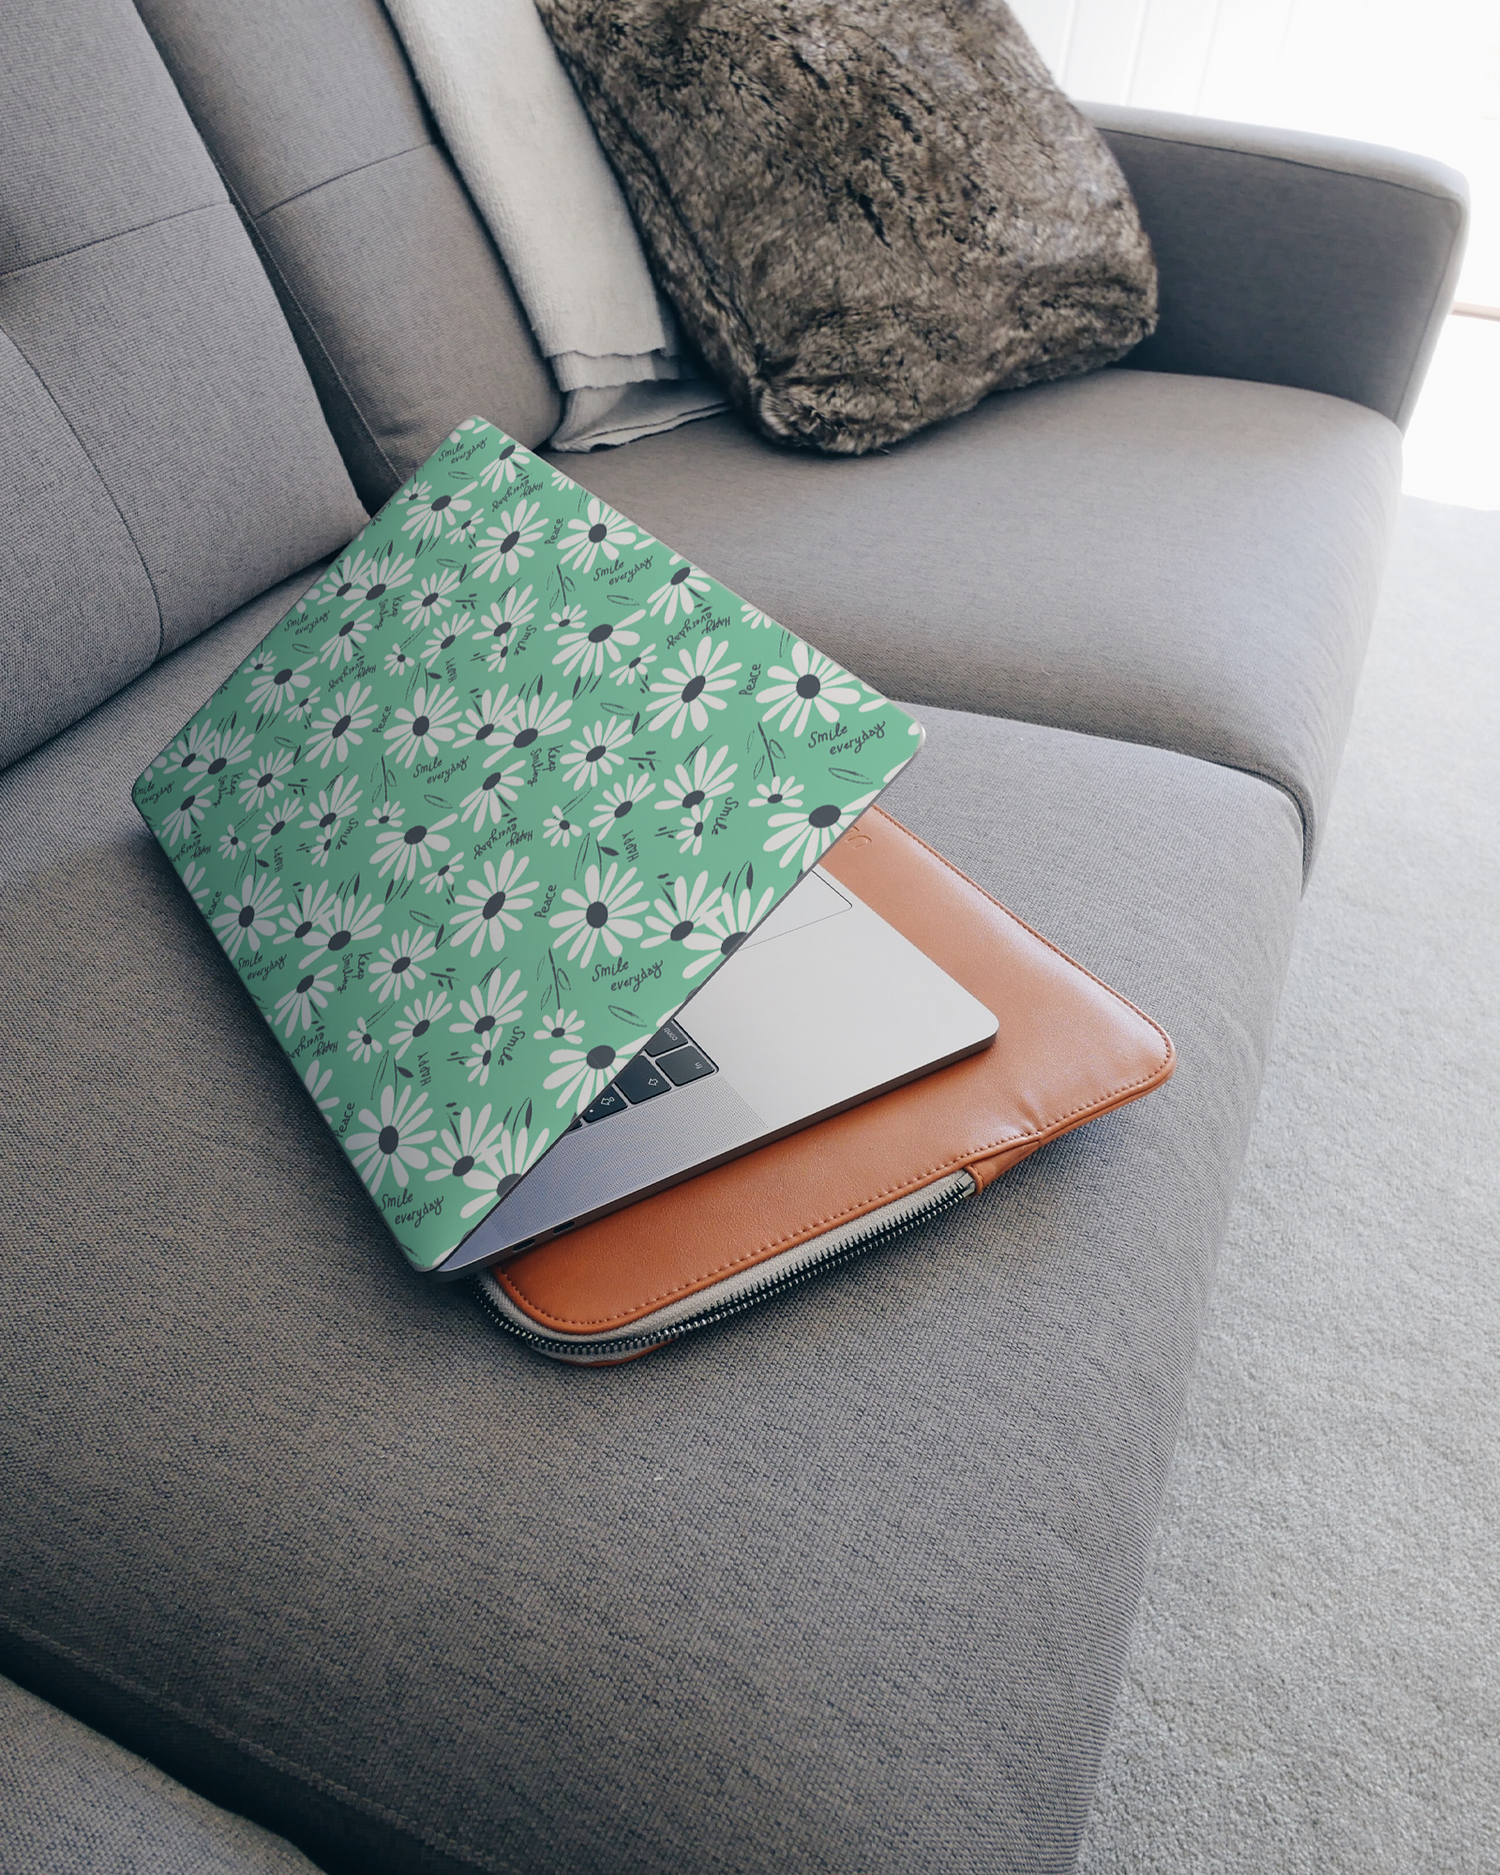 Positive Daisies Laptop Skin for 15 inch Apple MacBooks on a couch